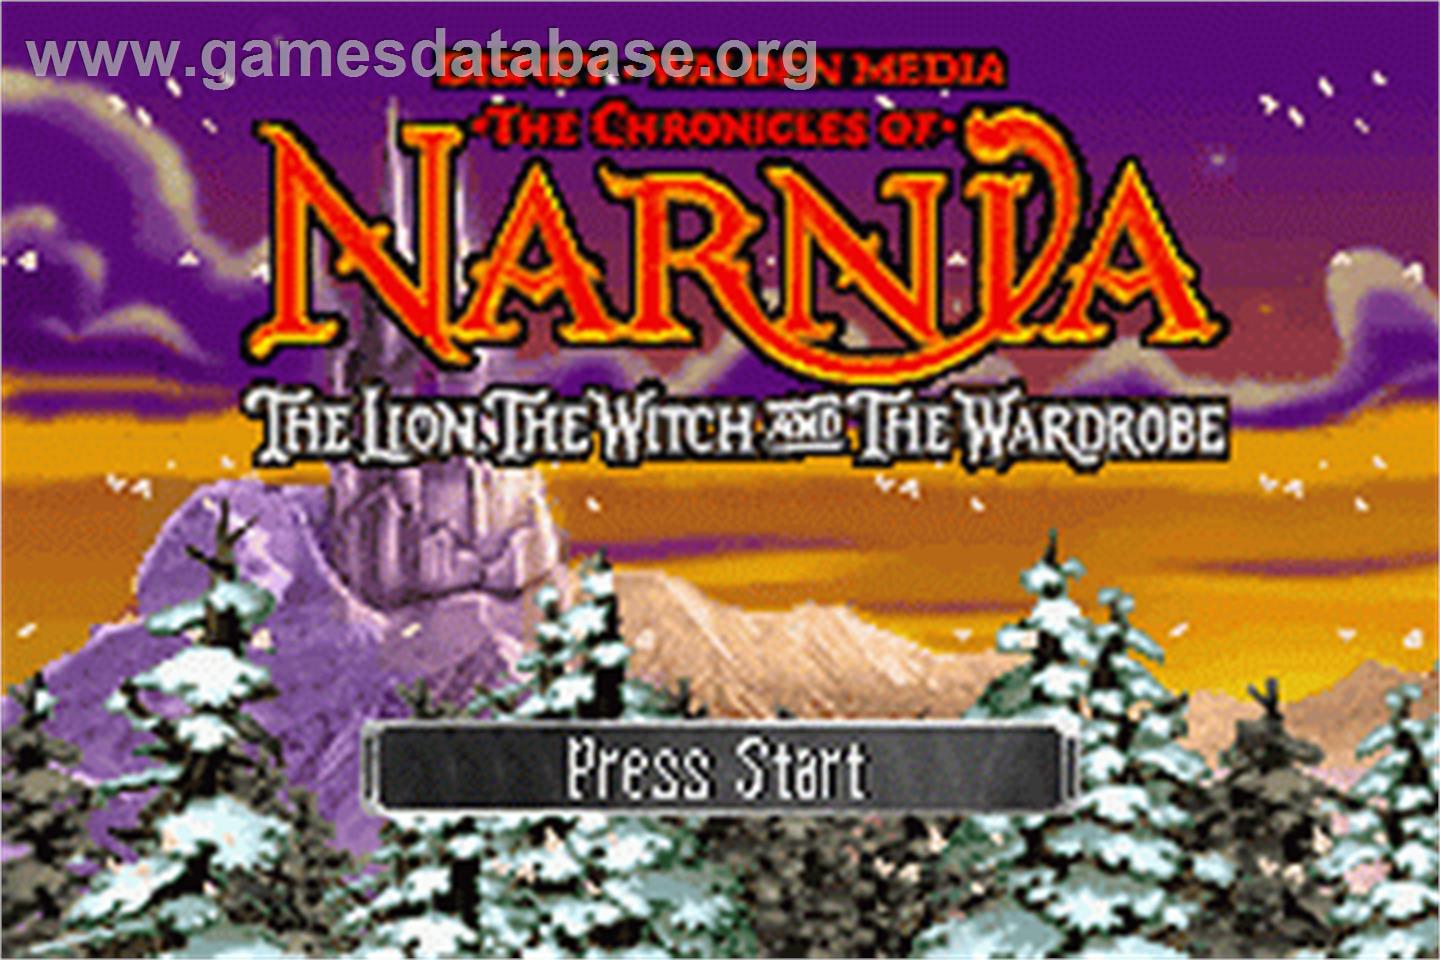 Chronicles of Narnia: The Lion, the Witch and the Wardrobe - Nintendo Game Boy Advance - Artwork - Title Screen